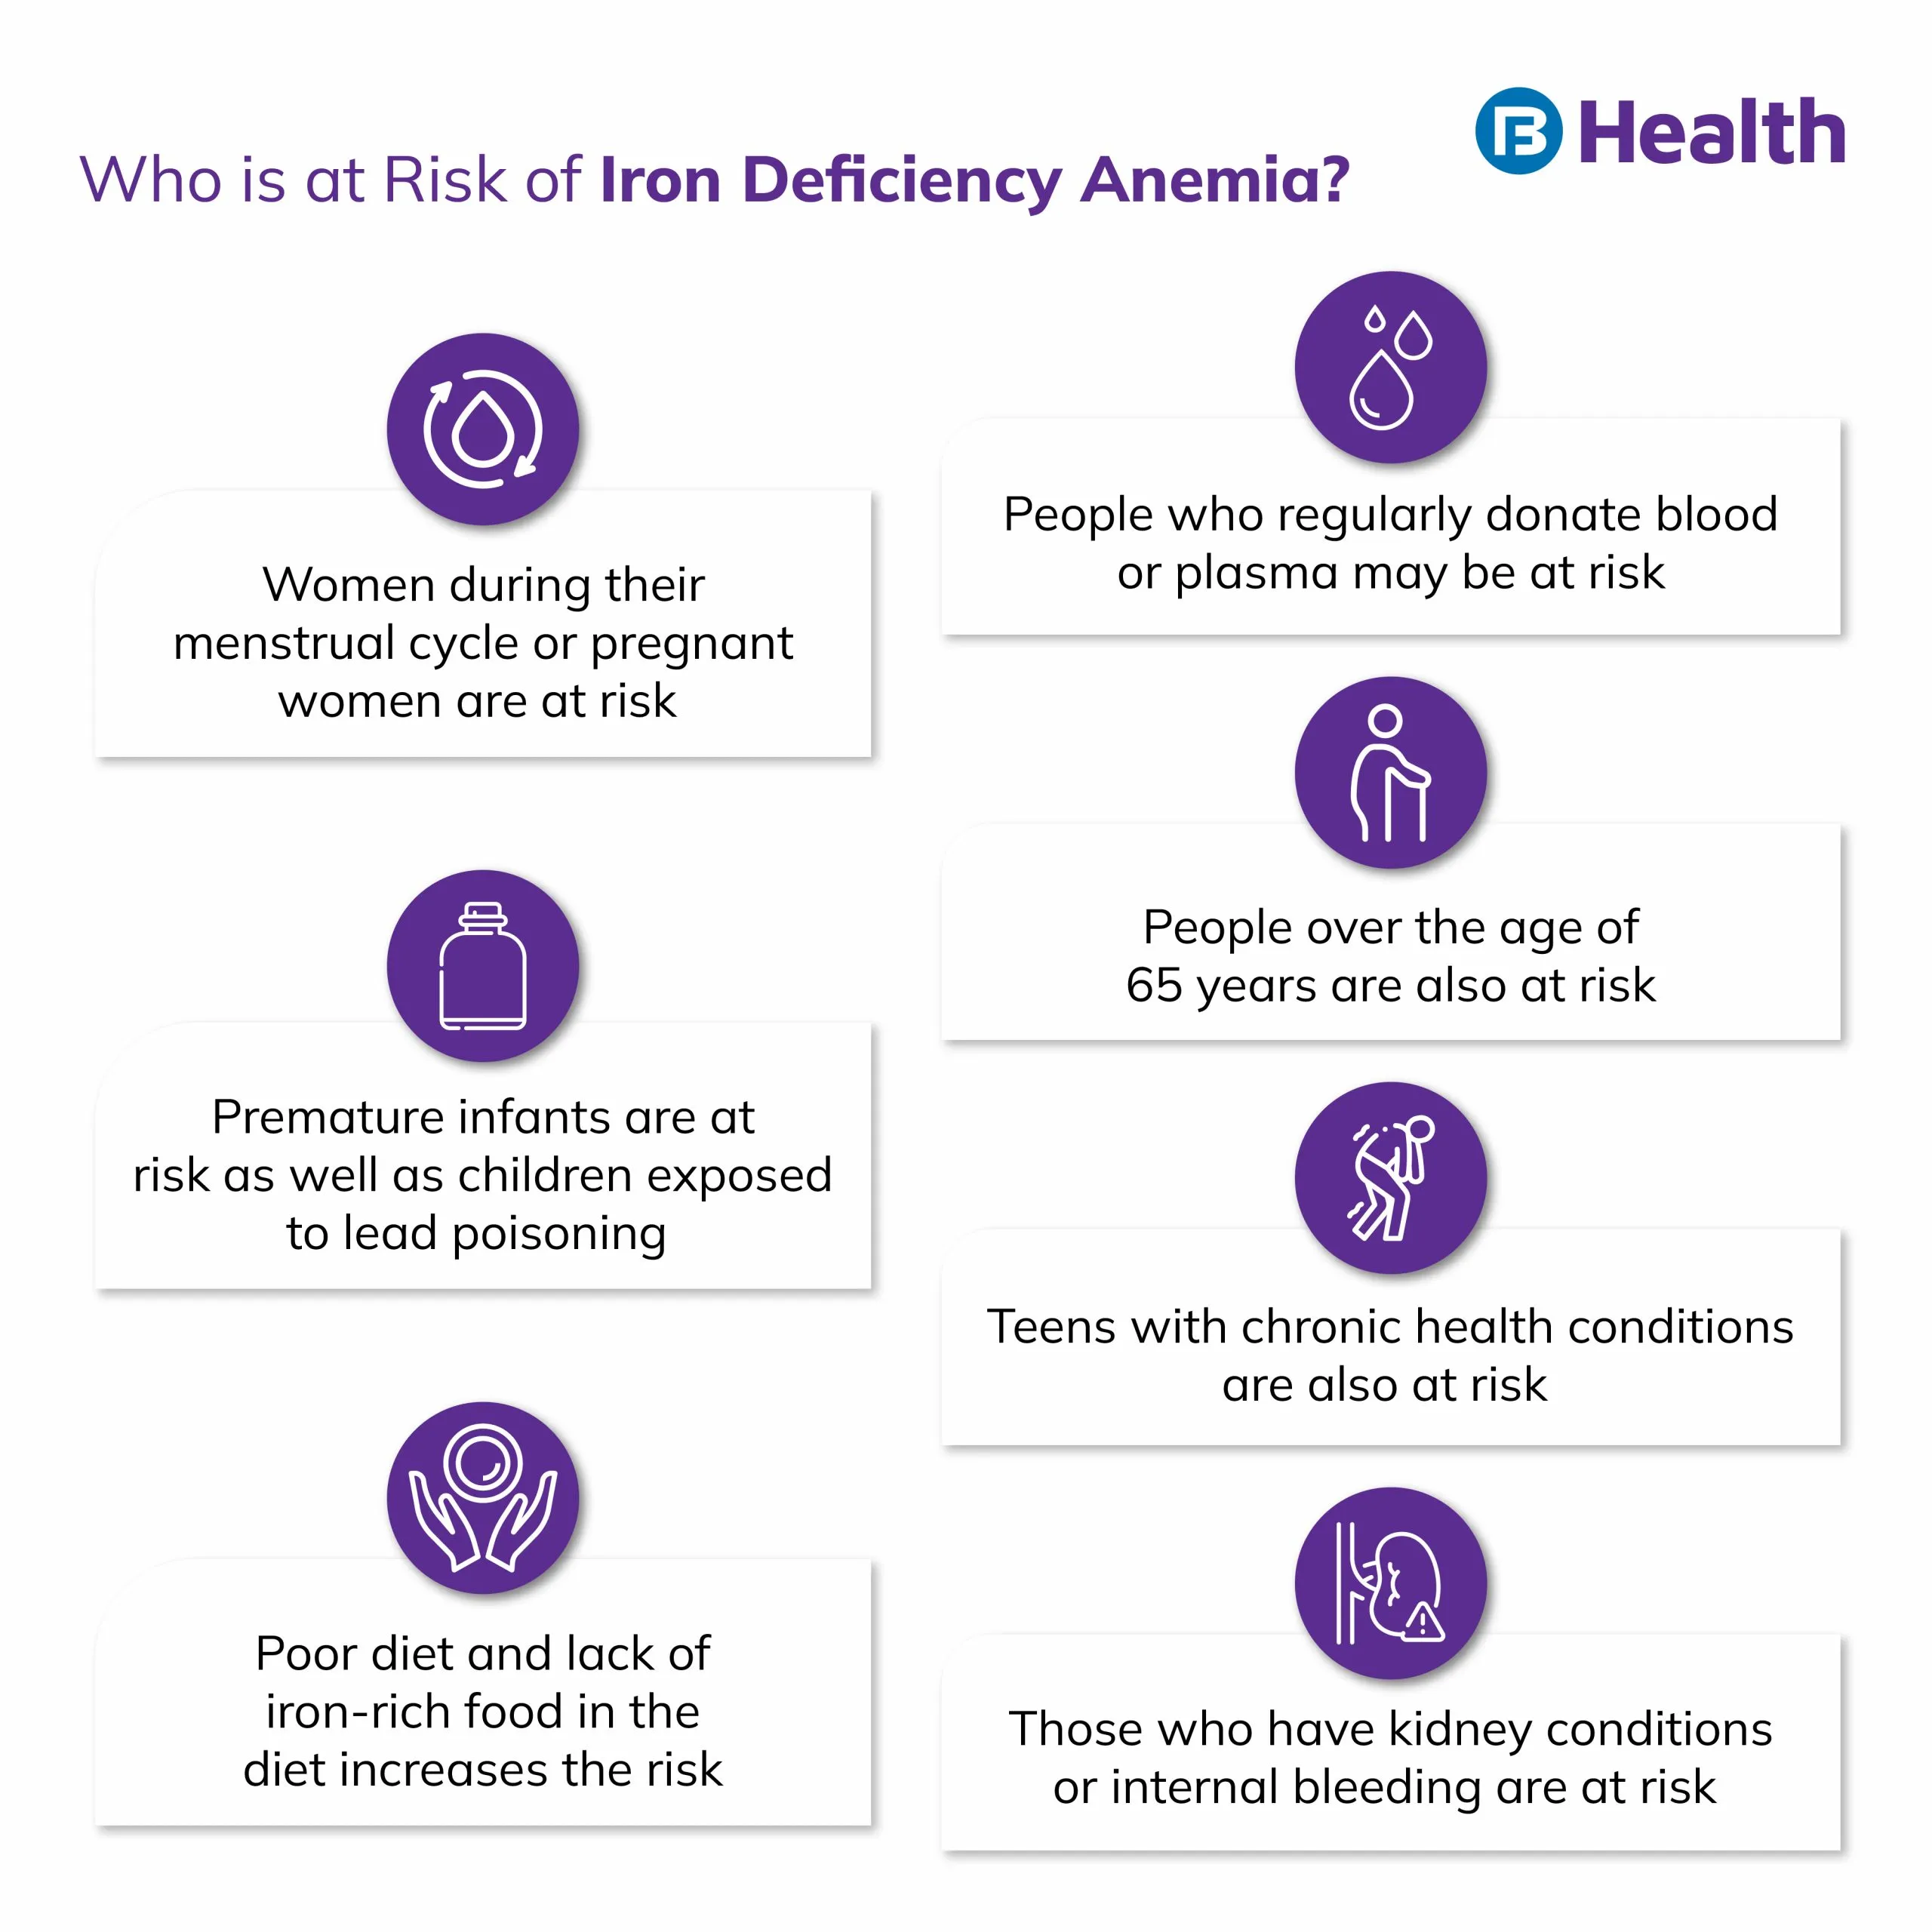 Iron deficiency anemia risk